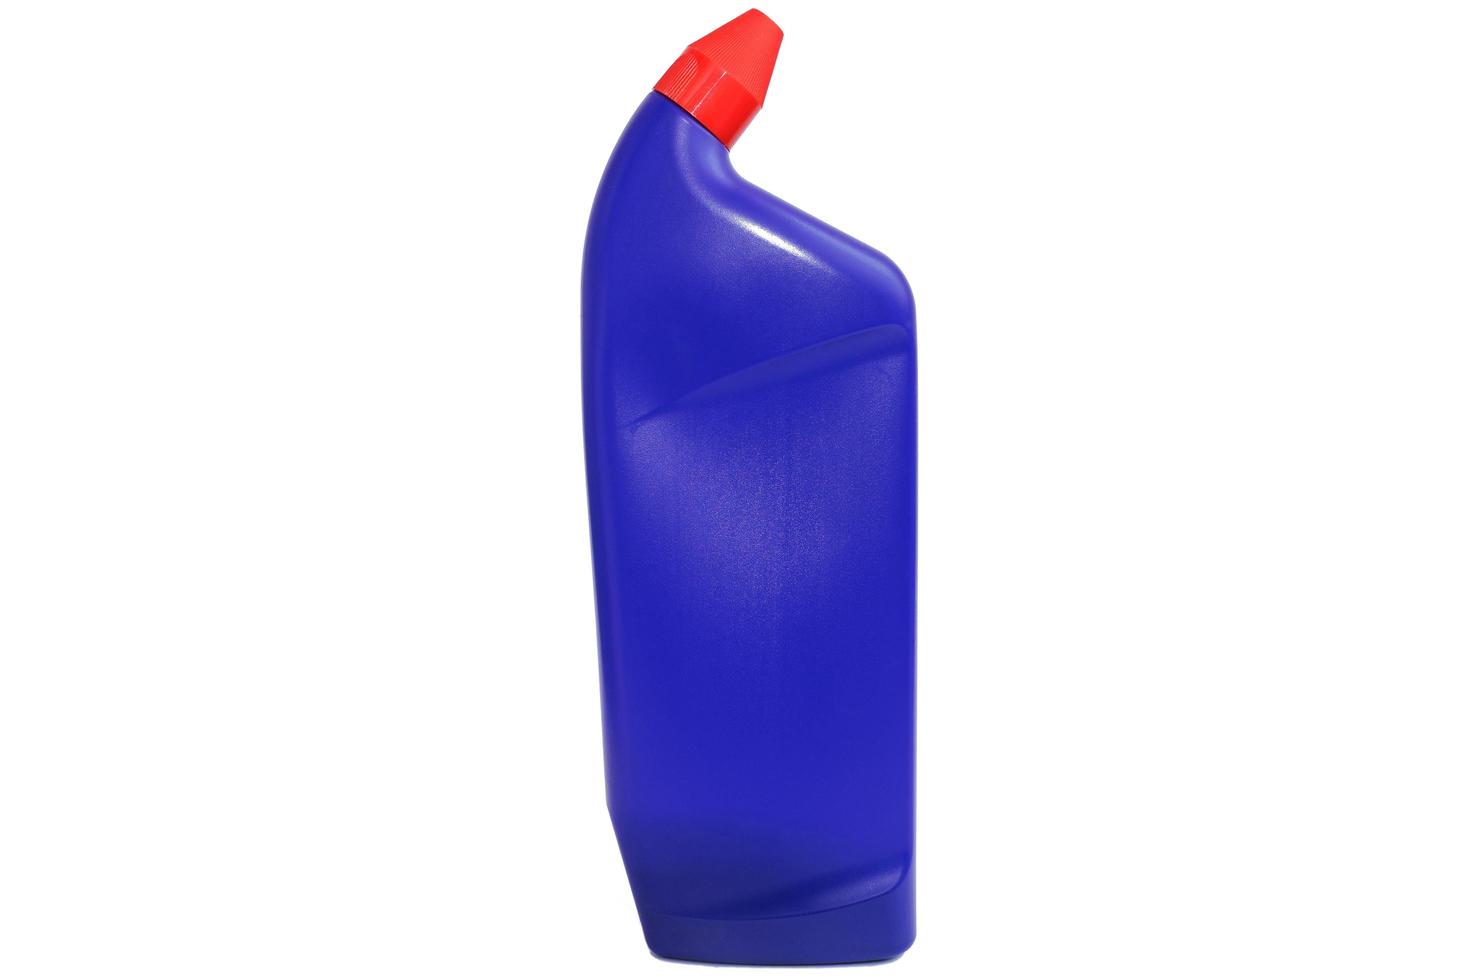 Plastic bottle for liquid products photo